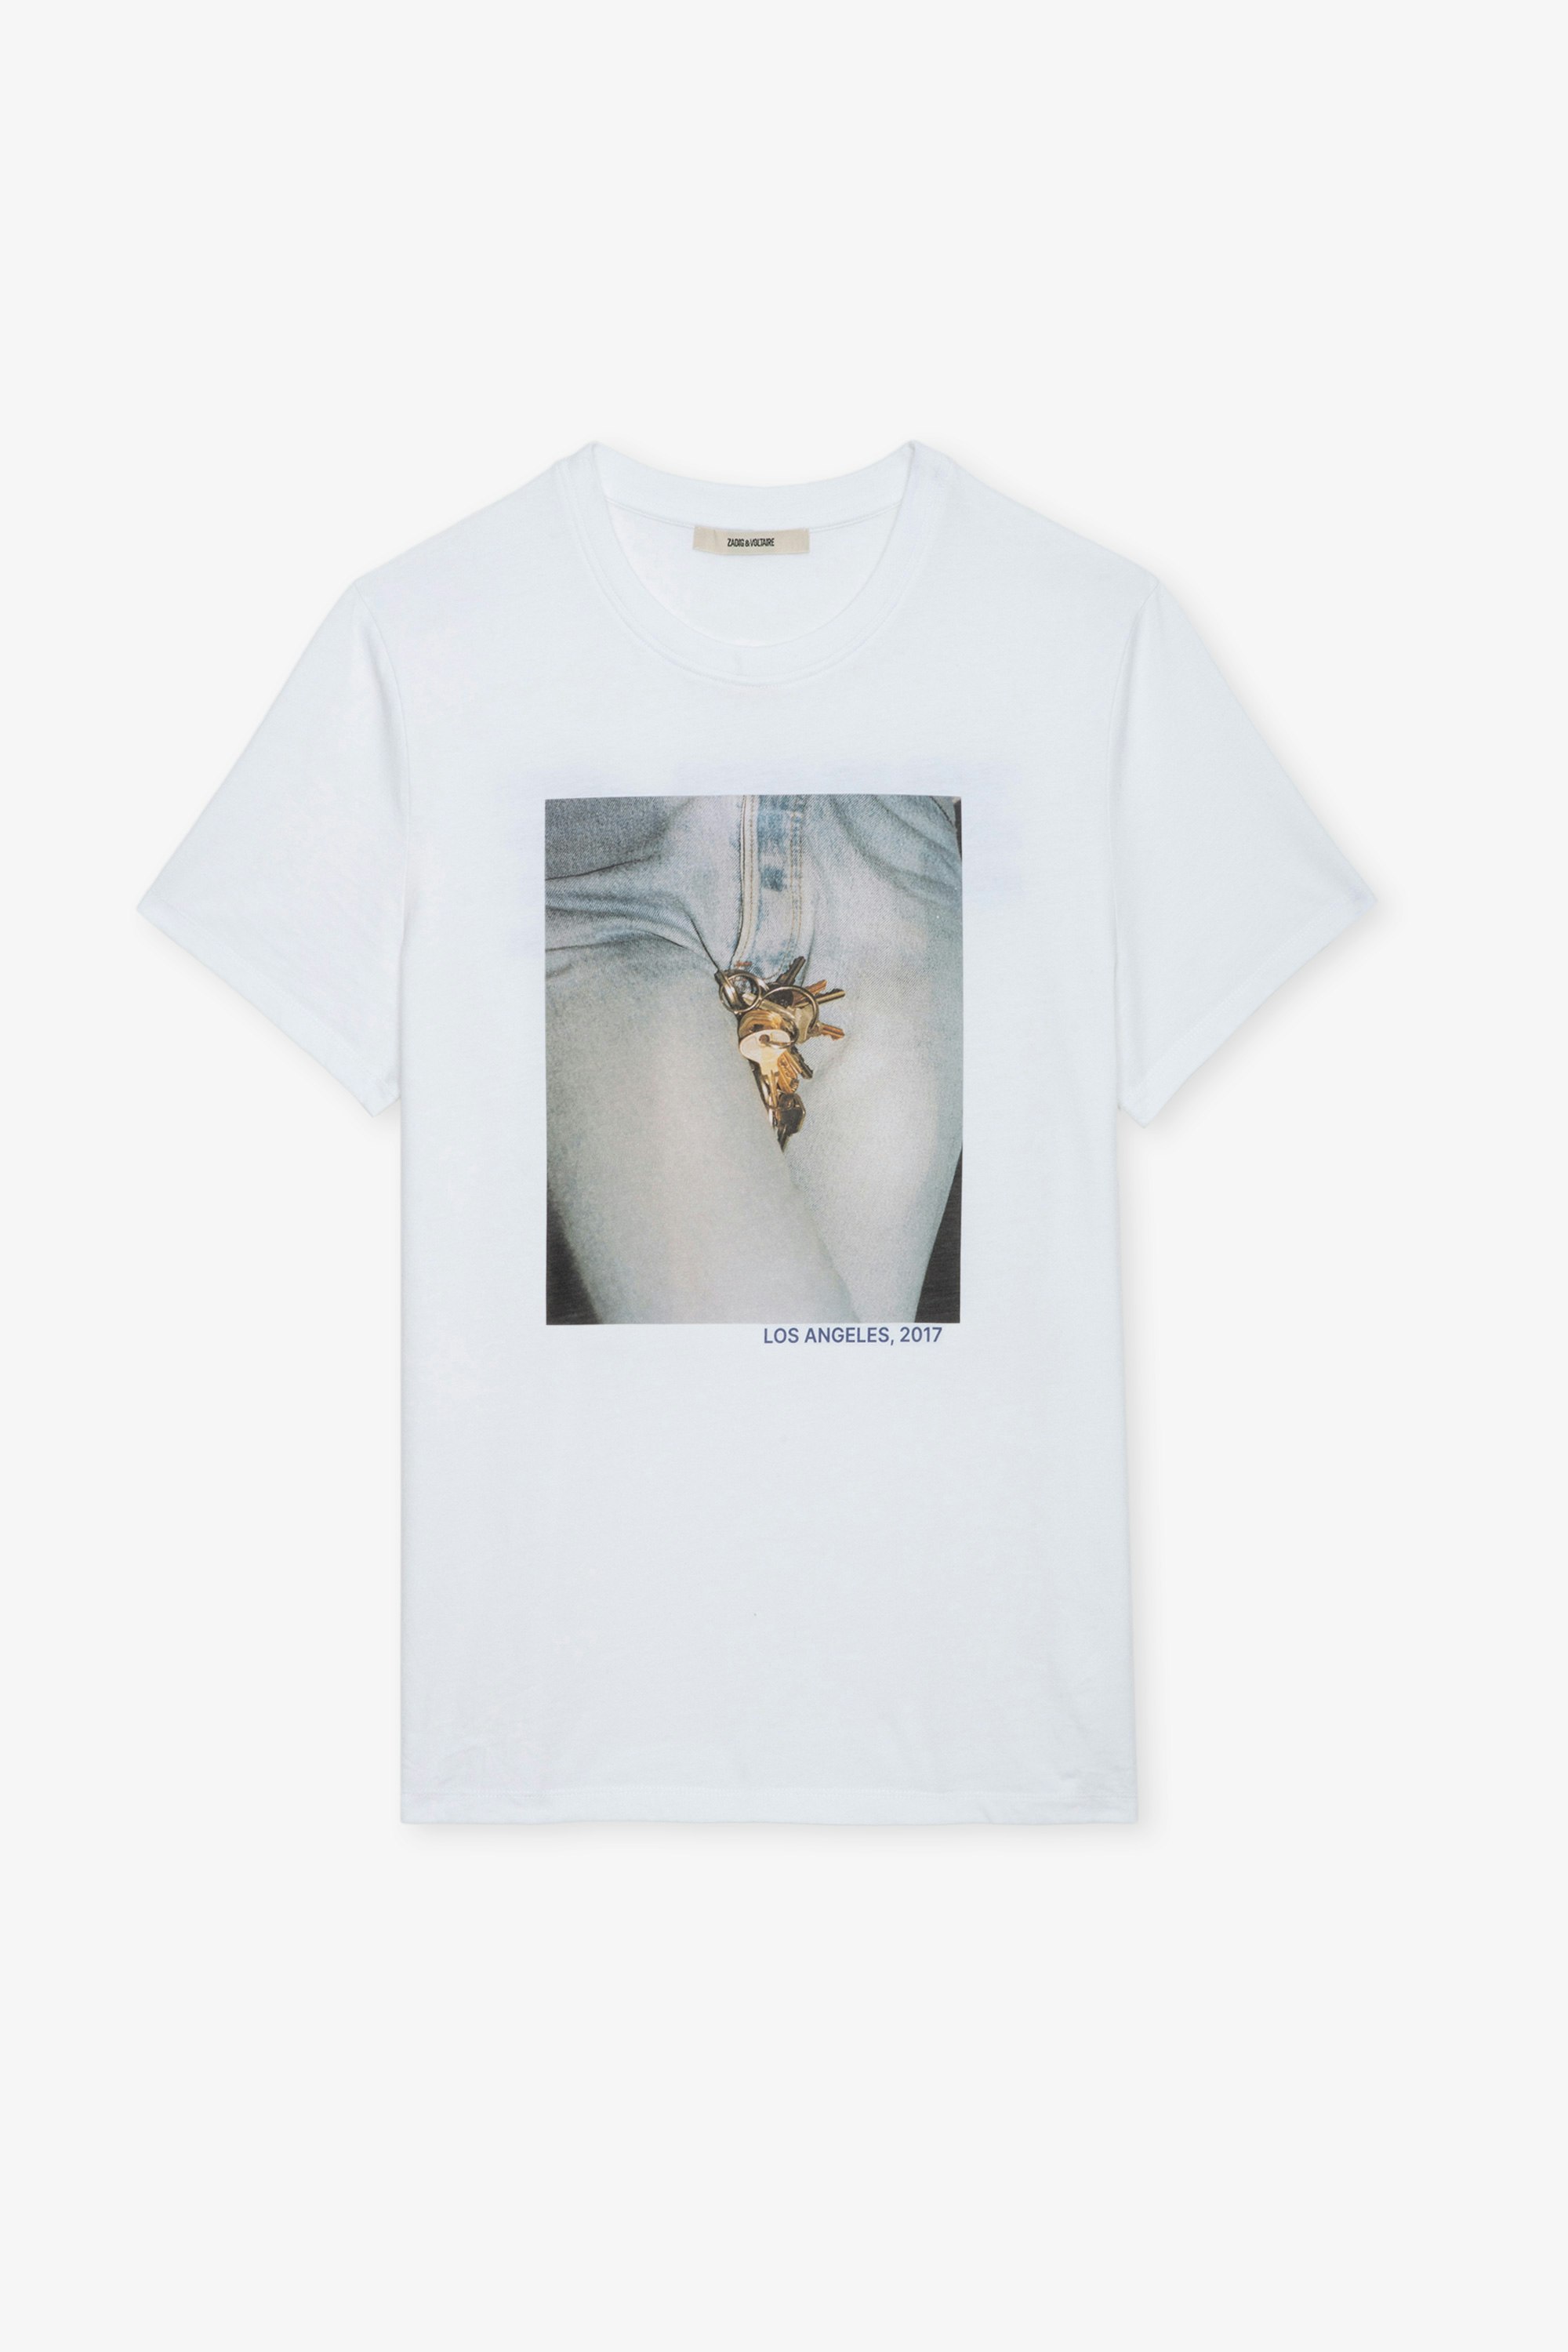 Tommy Photoprint T-shirt - White cotton short-sleeved T-shirt, photoprint on the front and slogan on the back.